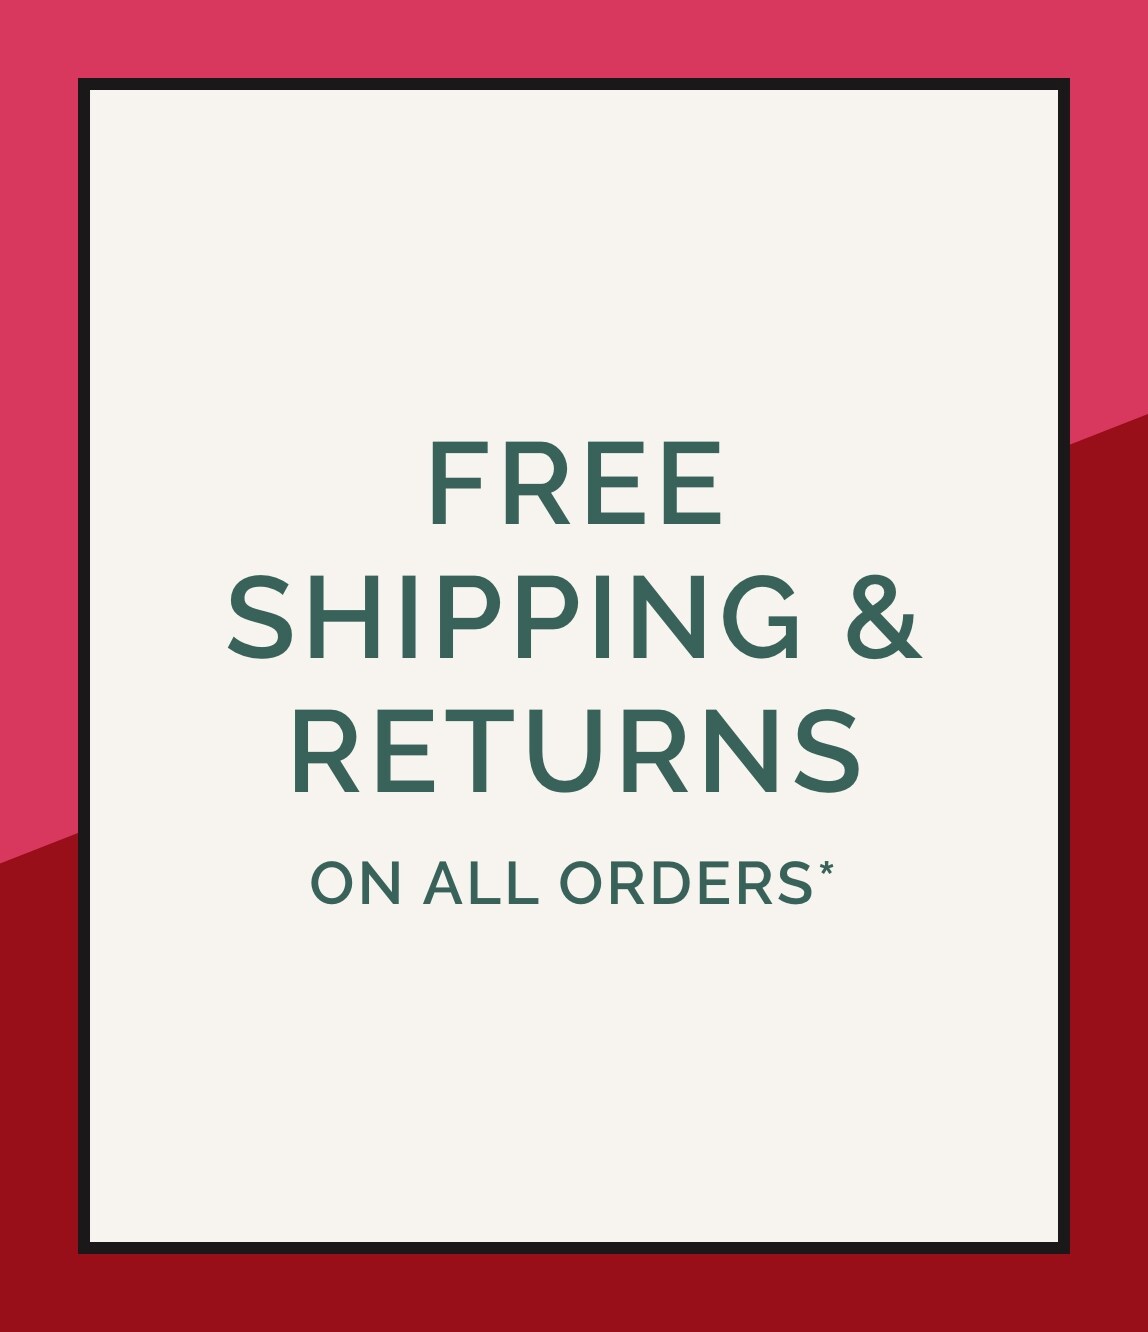 FREE DELIVERY ON ALL ORDERS